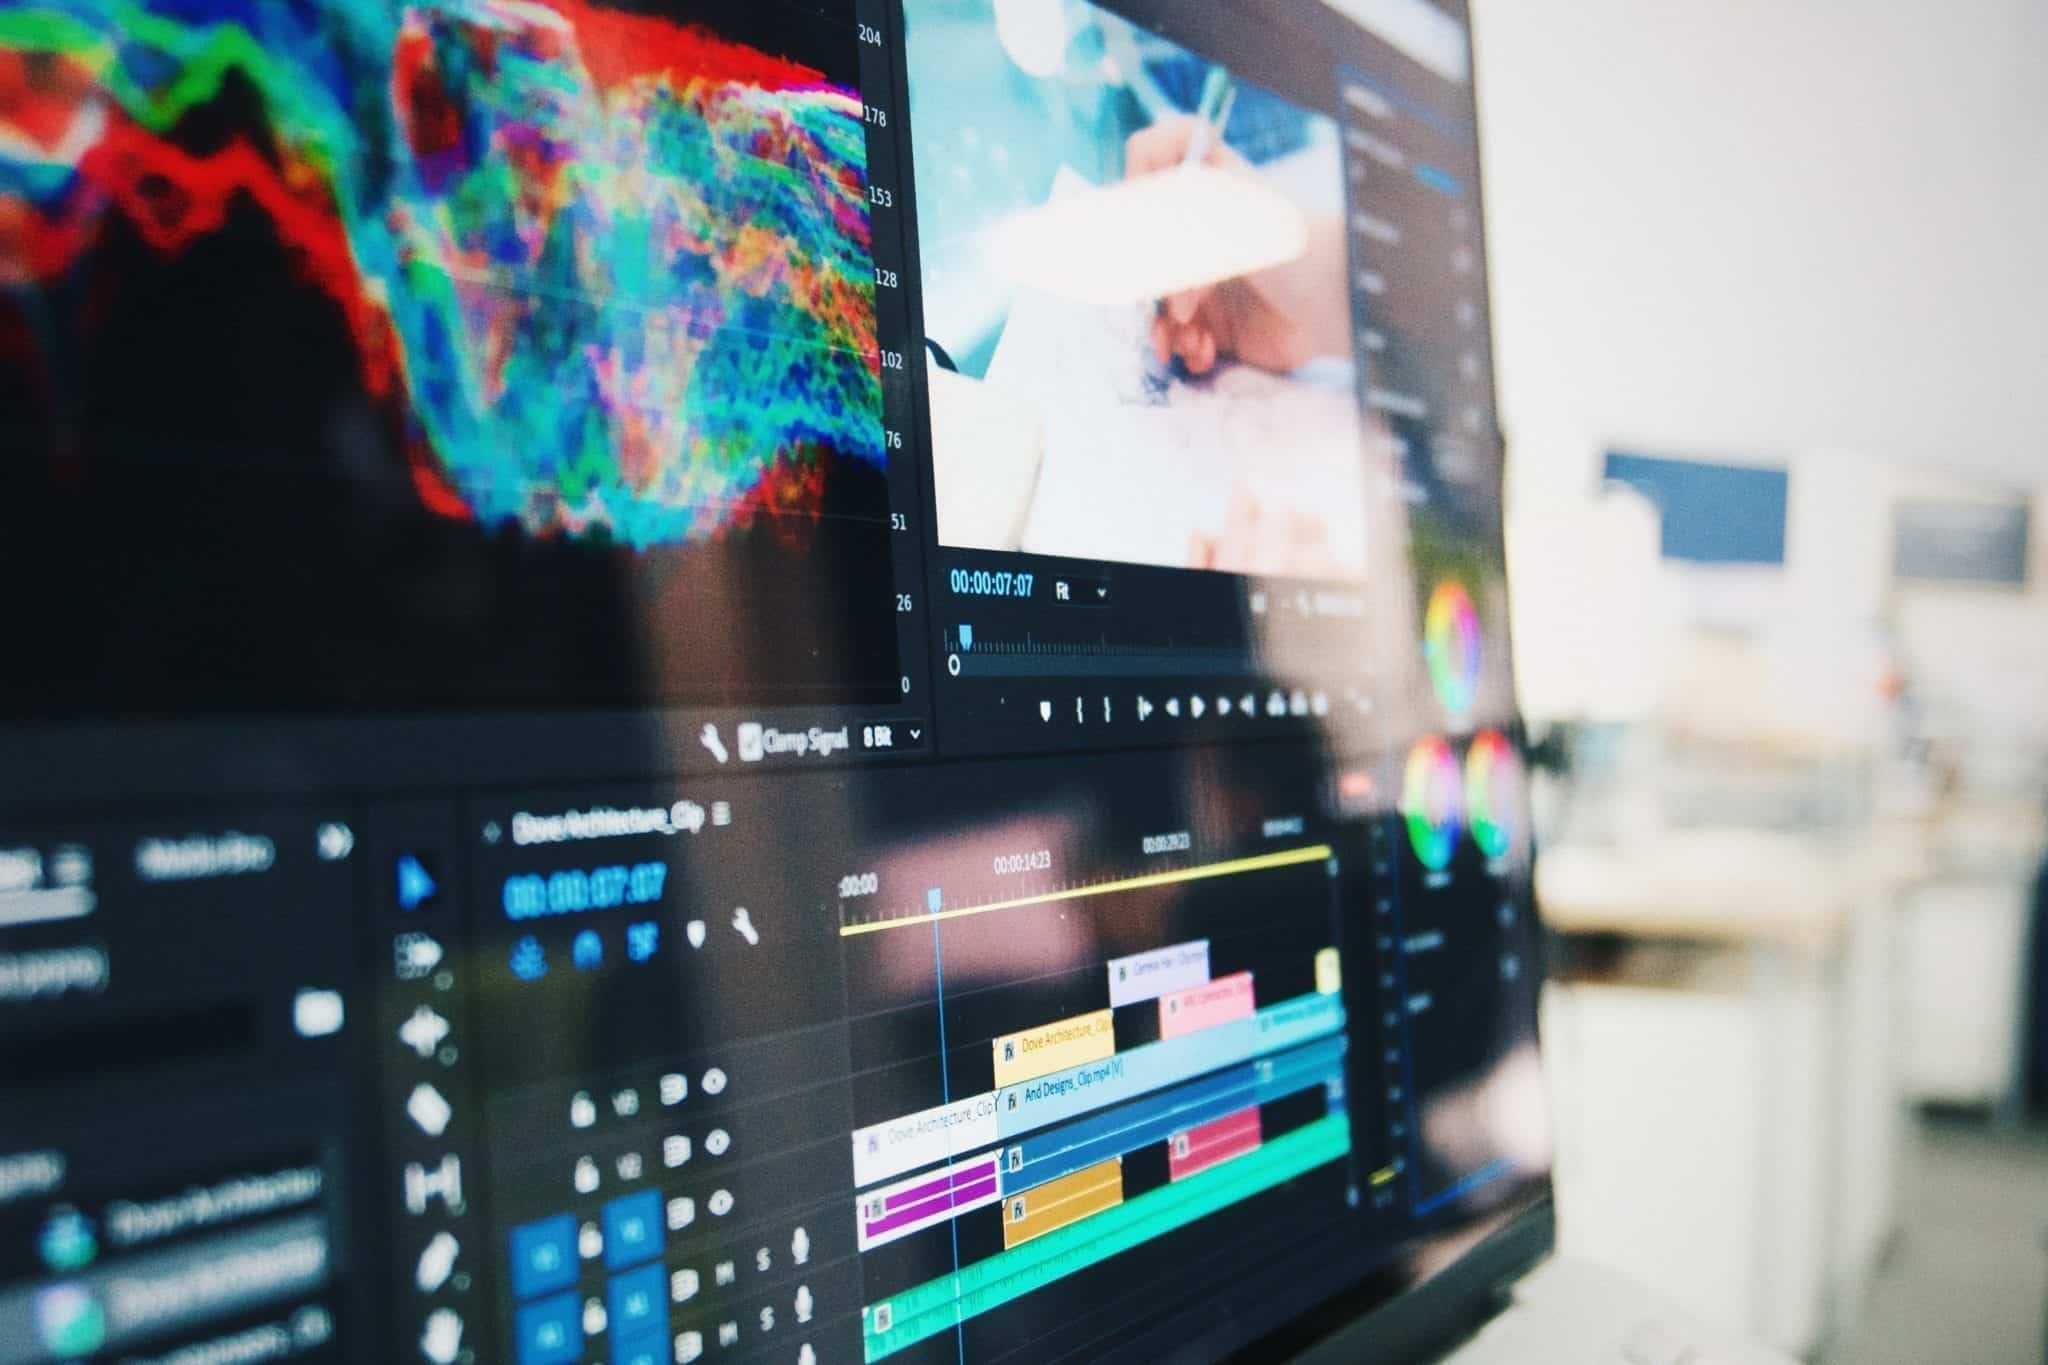 Video trends that could be exciting for the future of videography creation